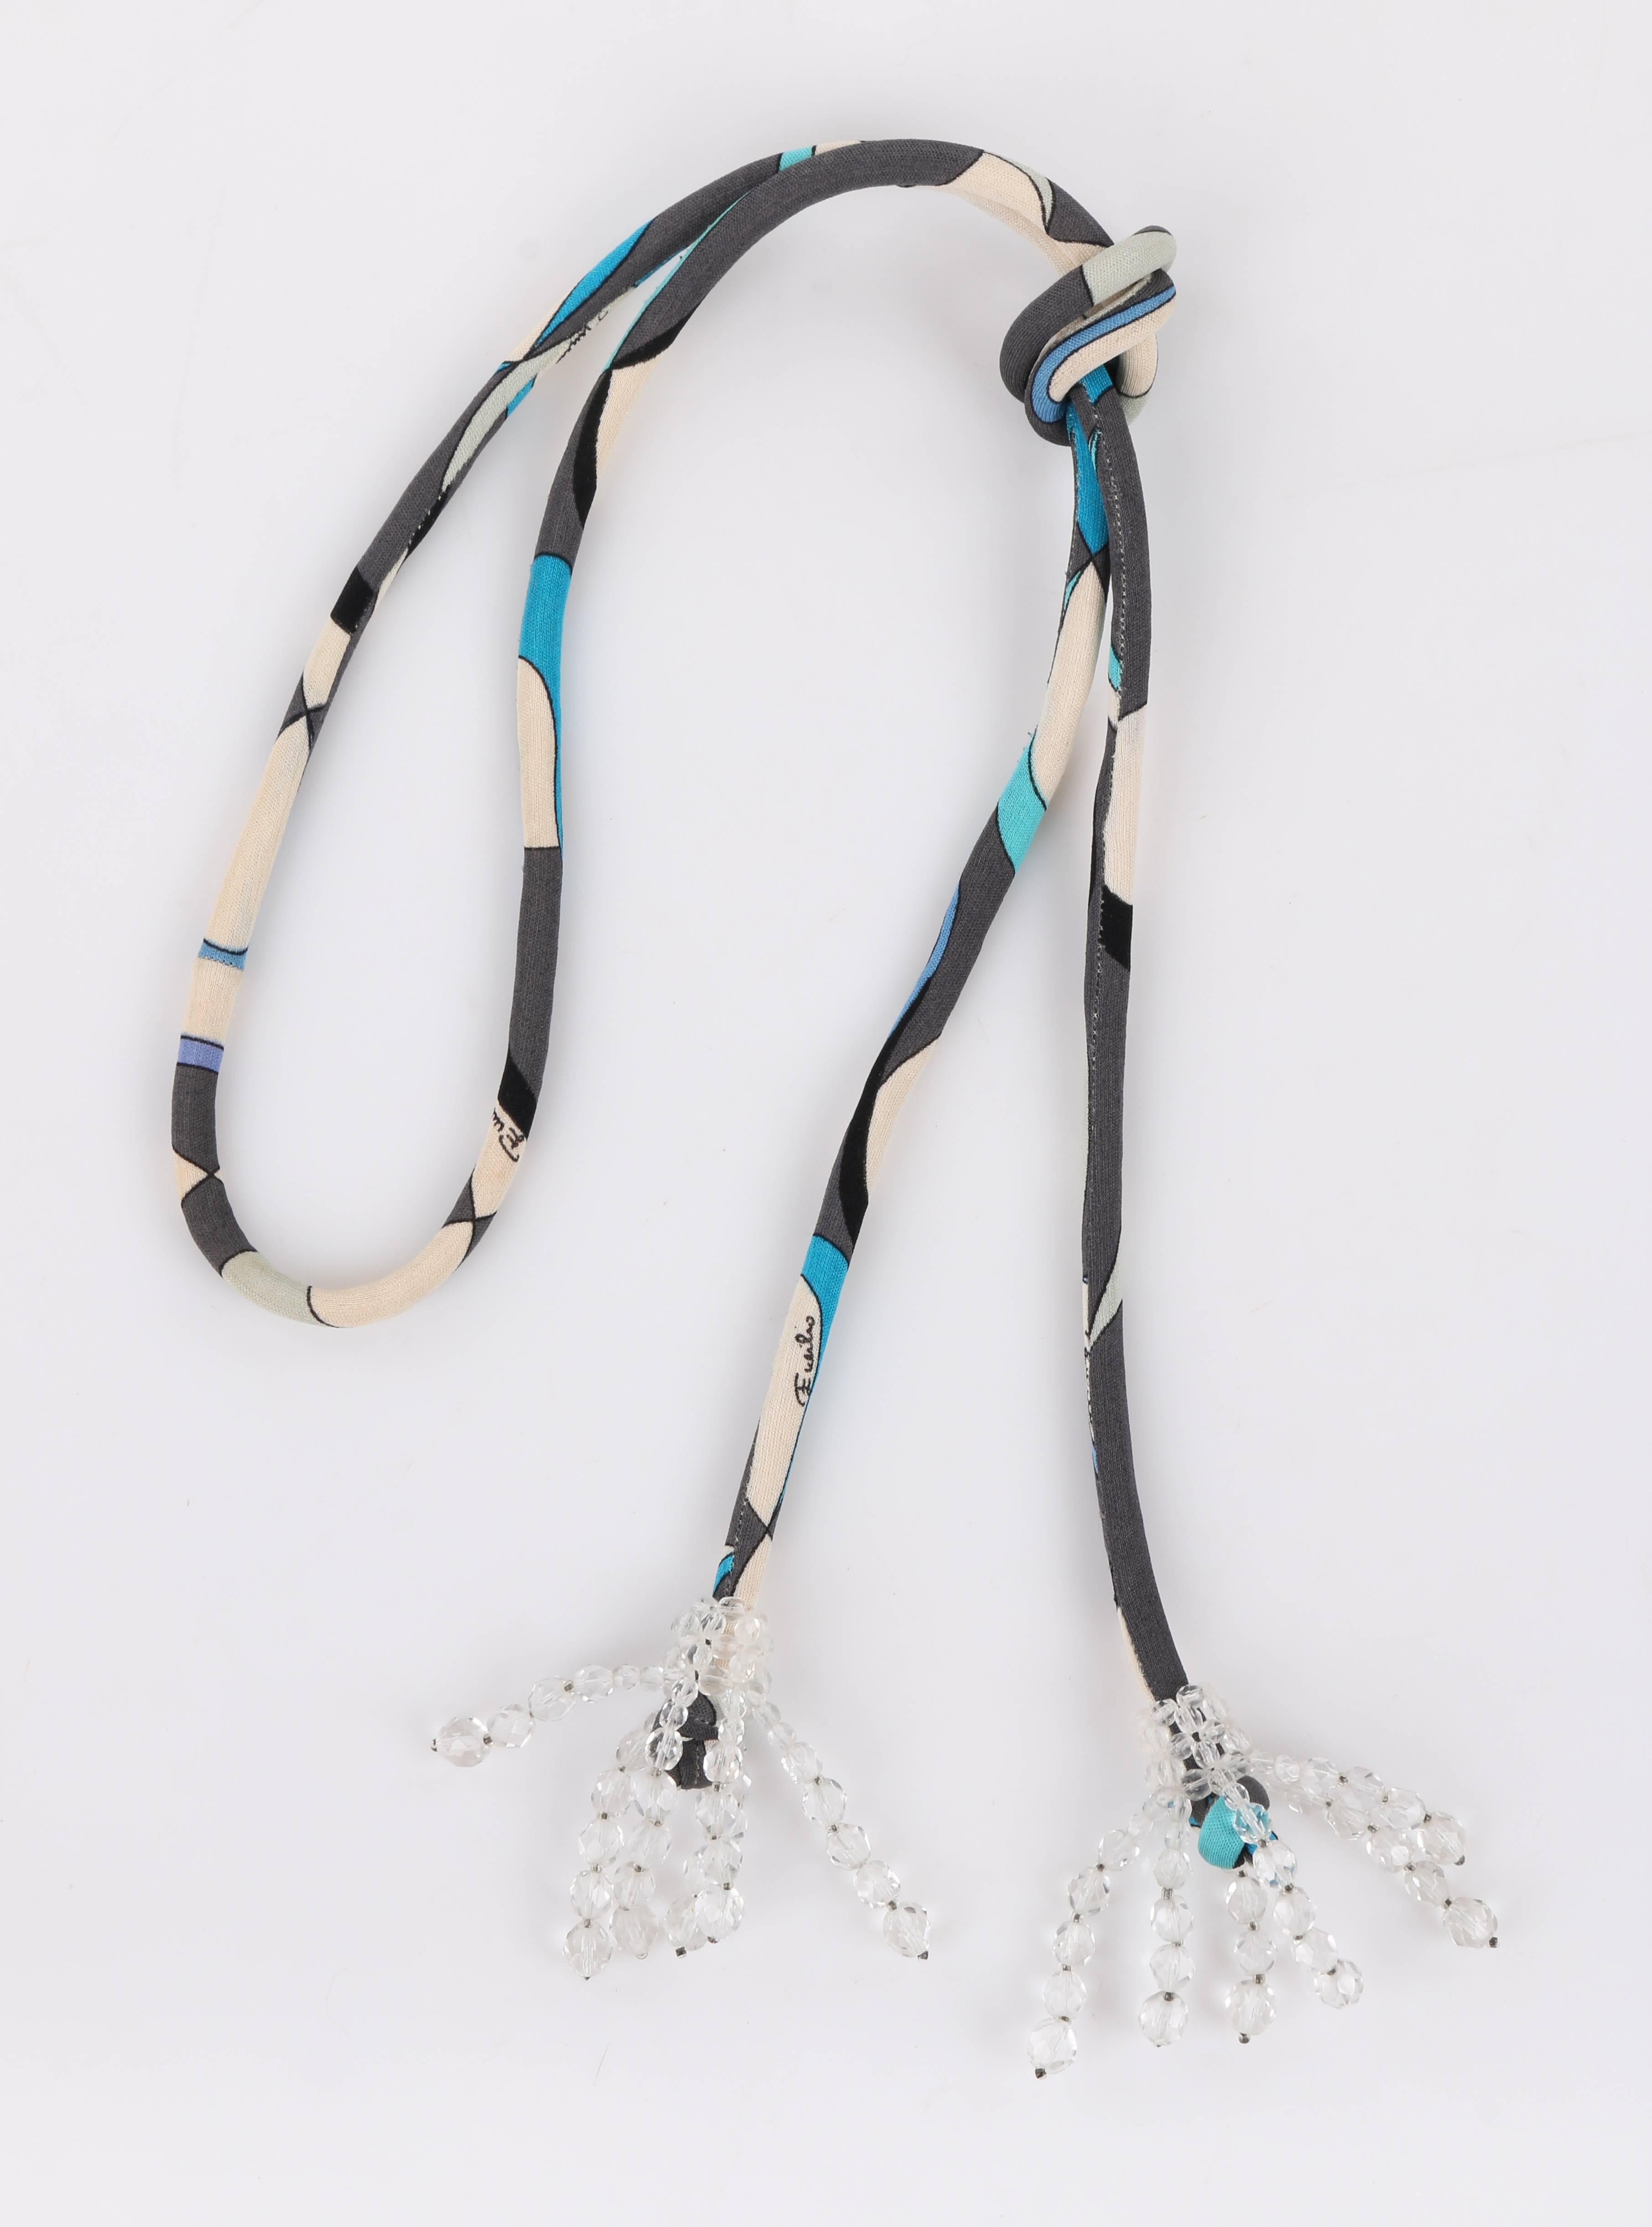 Vintage Emilio Pucci c.1960's multi-color signature print rope belt / lariat necklace designed by Coppola e Toppo. Thin silk jersey abstract signature print in shades of blue, white, and gray. Thin fabric body with knotted ends. Clear faceted